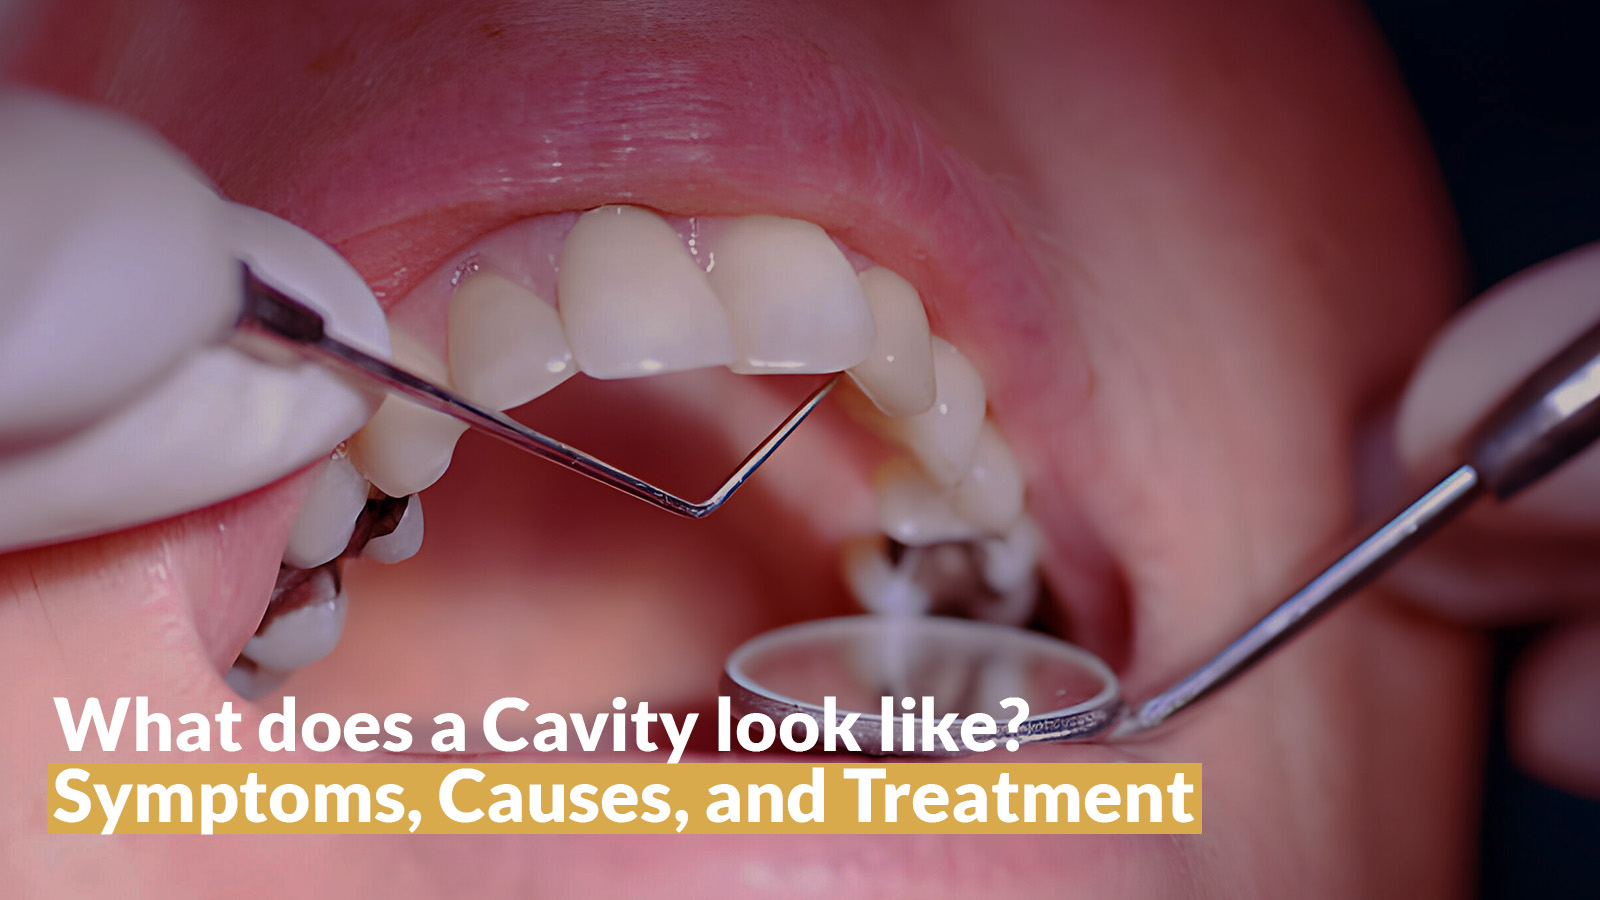 What does a Cavity look like? Symptoms, Causes, and Treatment.